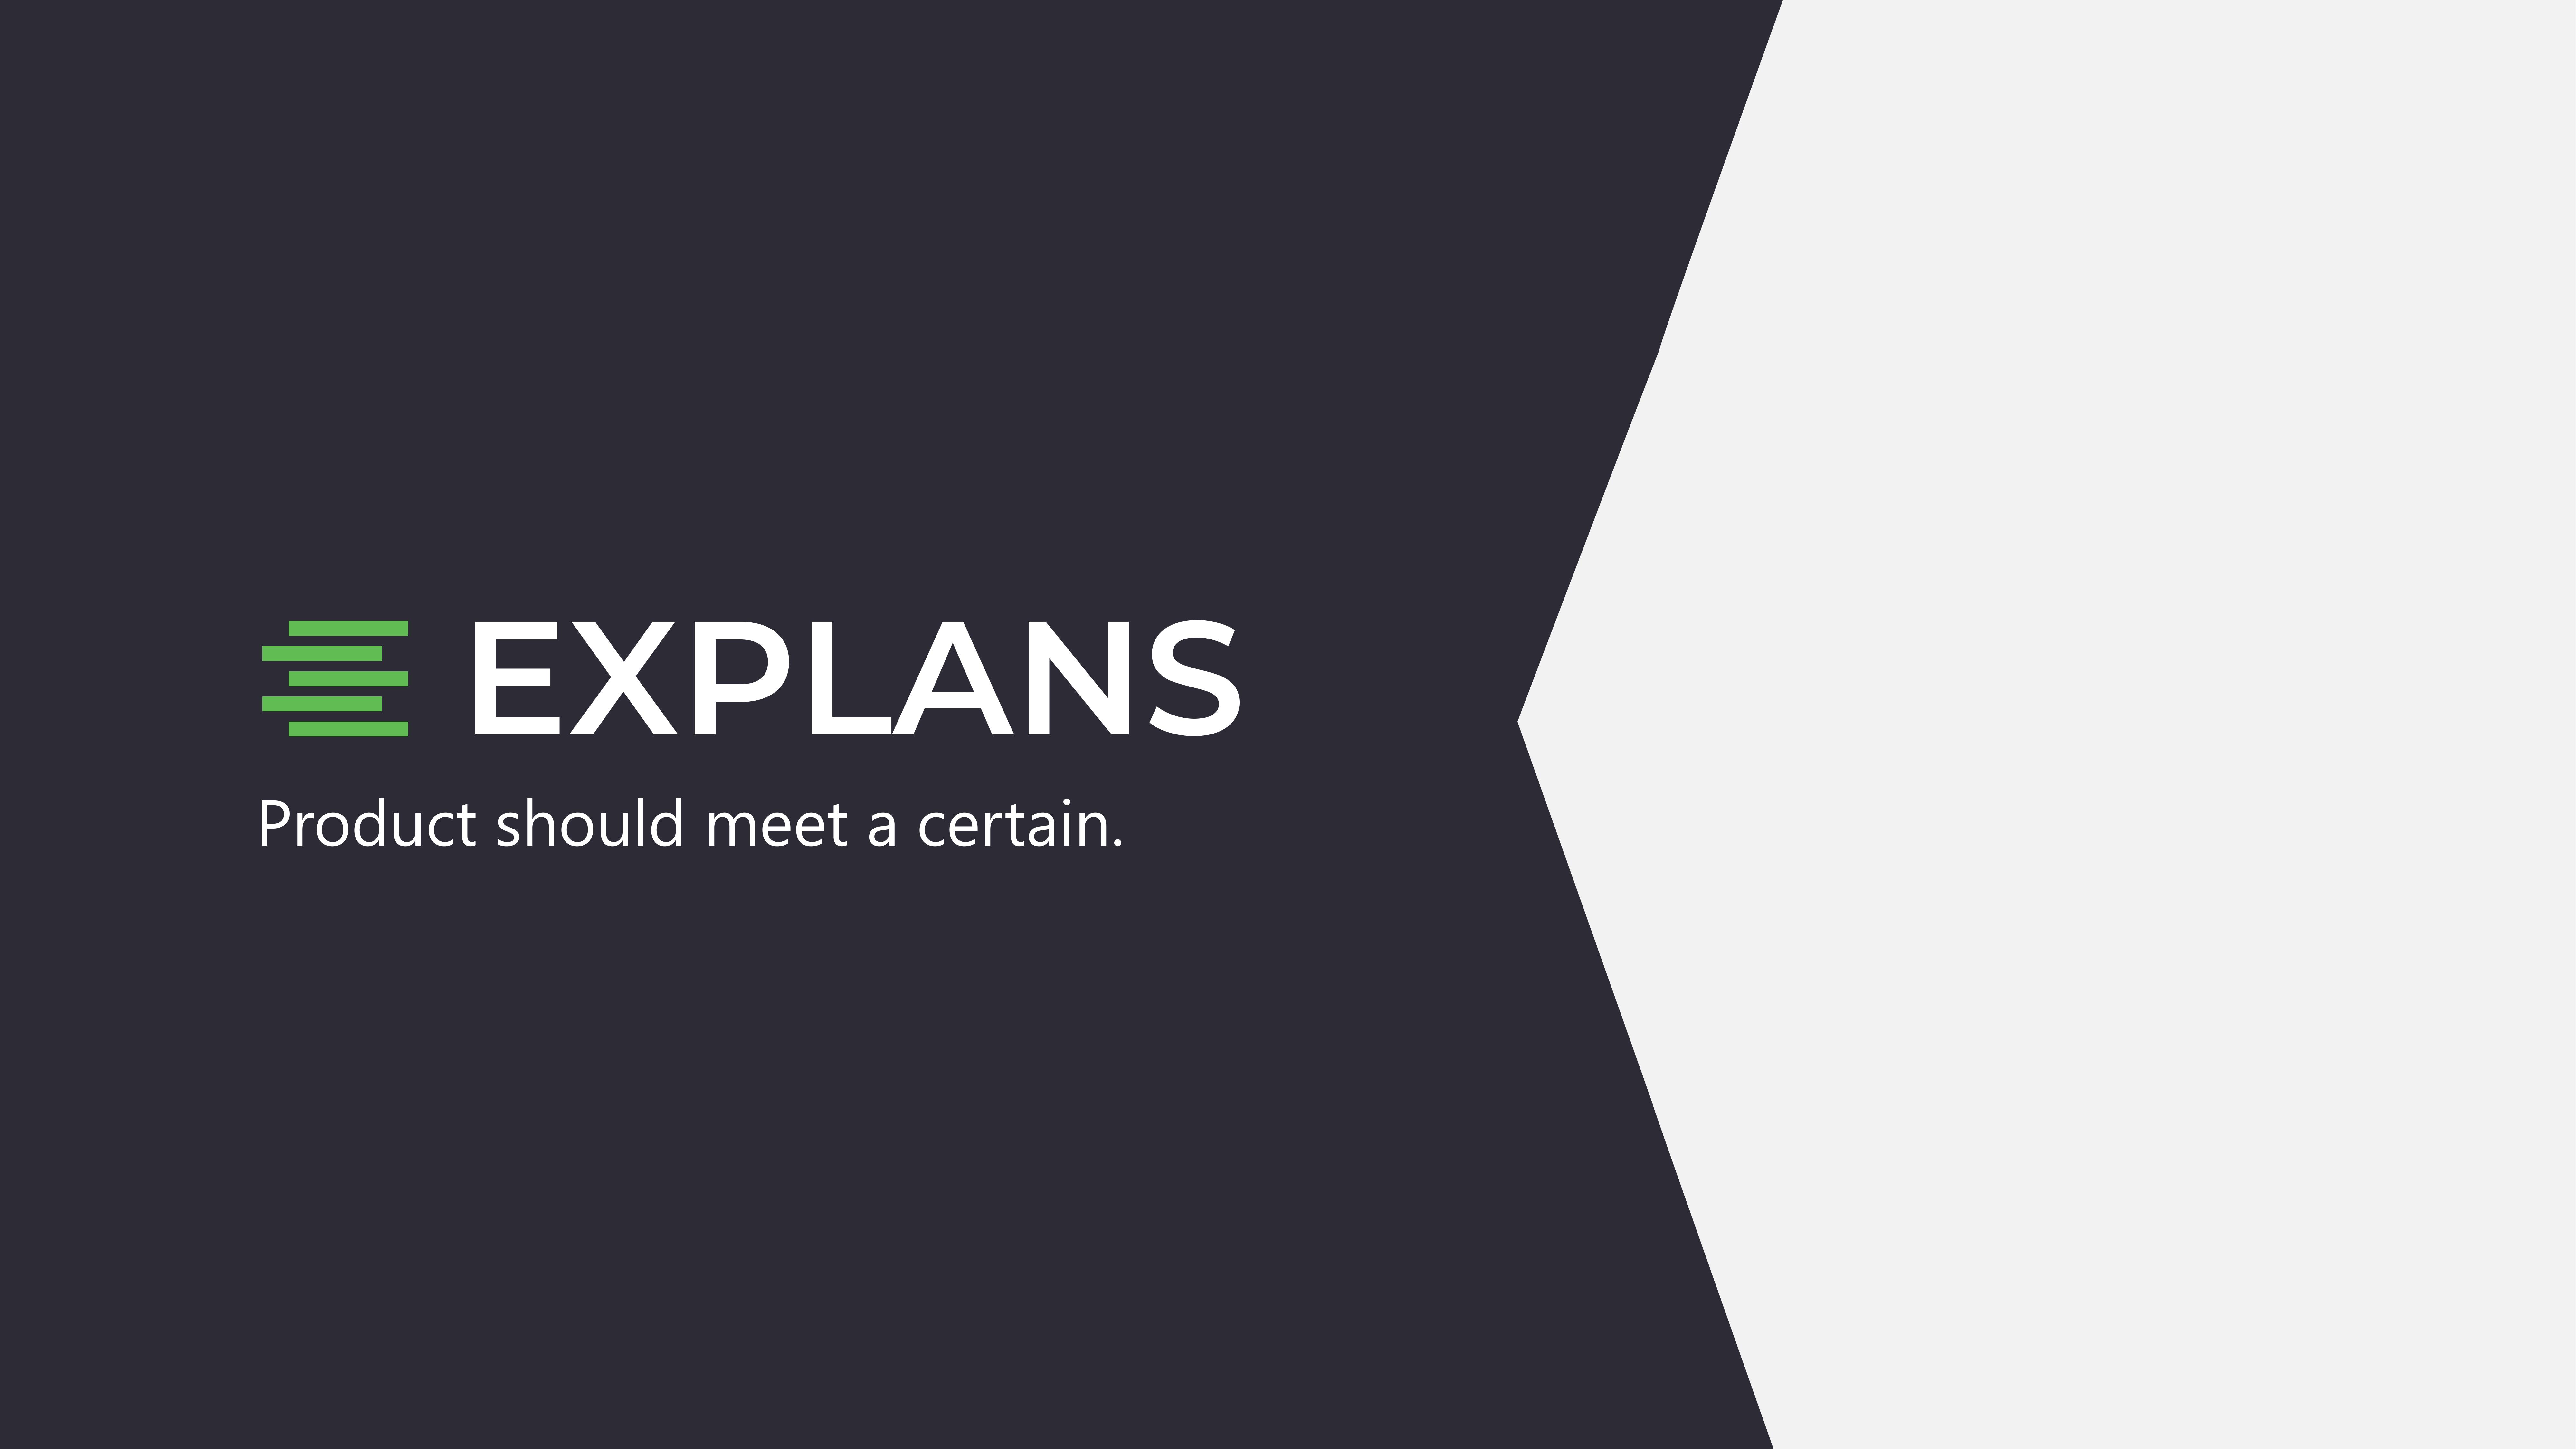 Explans PowerPoint Template